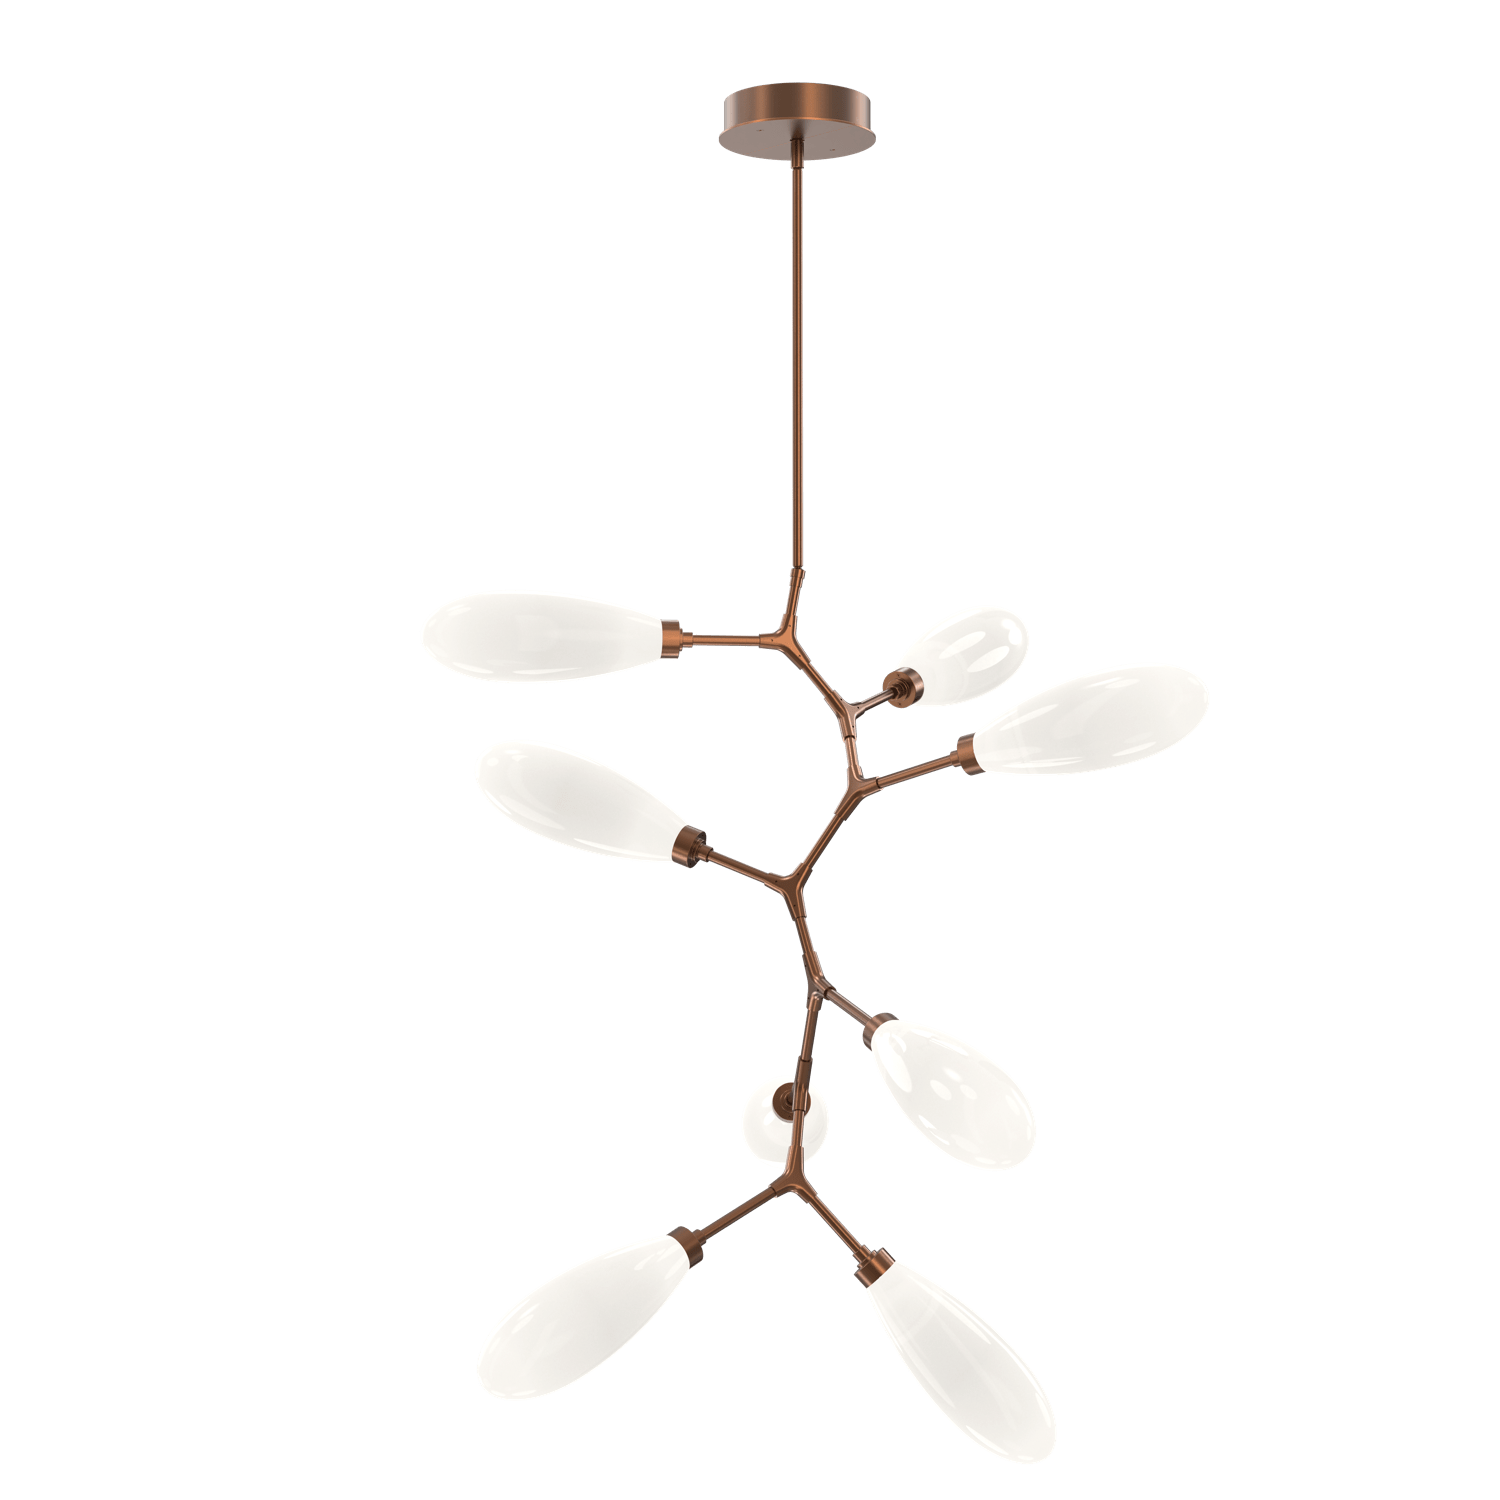 CHB0071-VB-BB-WL-LL-Hammerton-Studio-Fiori-8-light-organic-vine-chandelier-with-burnished-bronze-finish-and-opal-white-glass-shades-and-LED-lamping